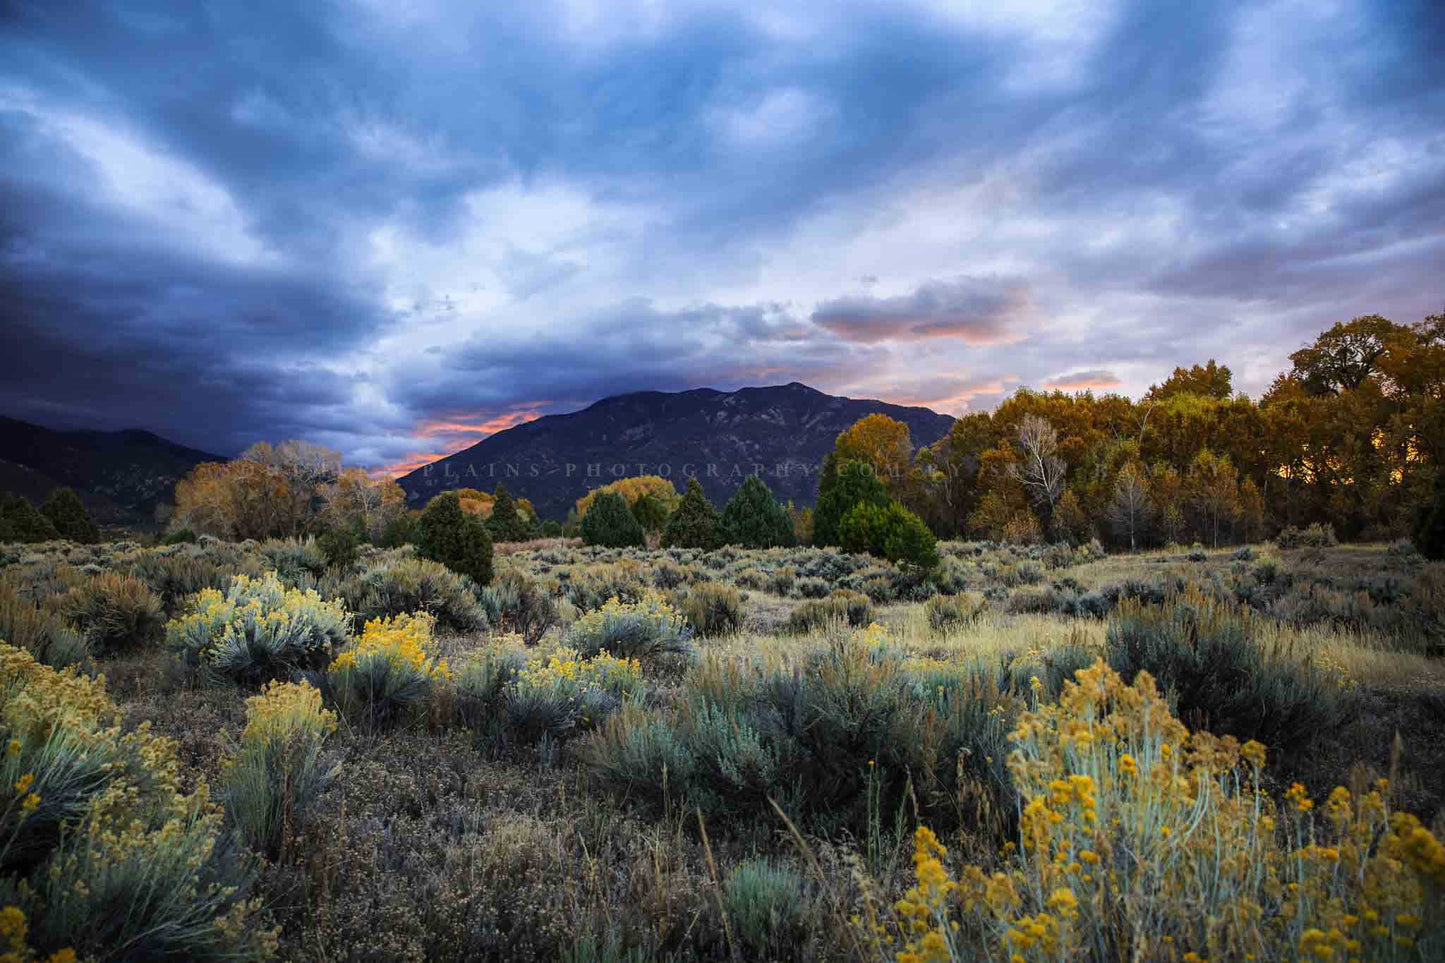 Rocky Mountain landscape photography print of Taos Mountain under a stormy sky at sunrise on an autumn morning near Taos, New Mexico by Sean Ramsey of Southern Plains Photography.